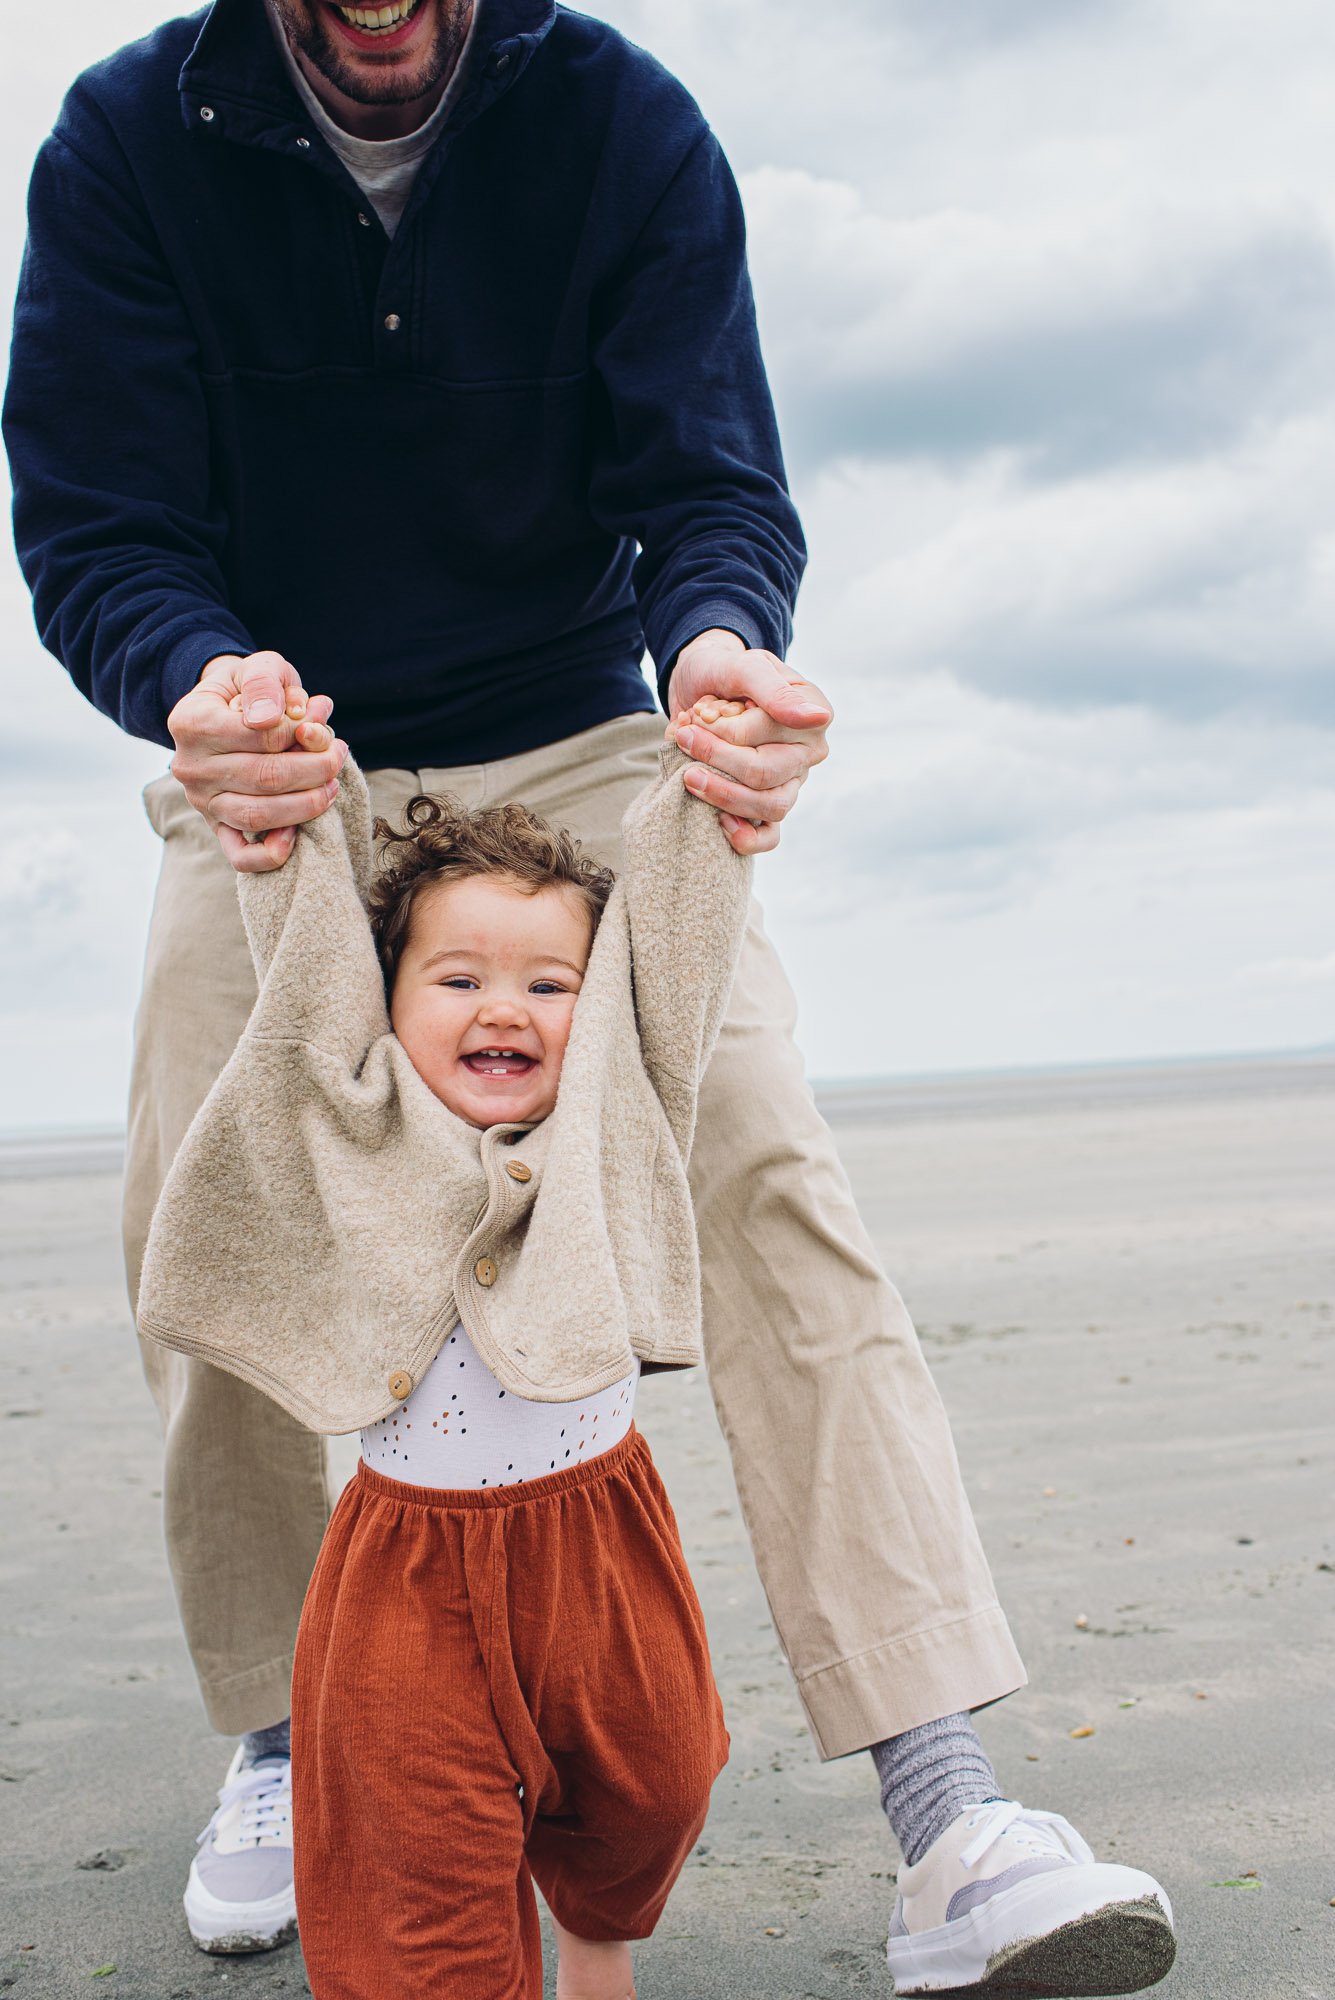 girl-swinging-daddies-hands-beach-sand-sea-clouds-chichester-professional-family-photographer.jpg